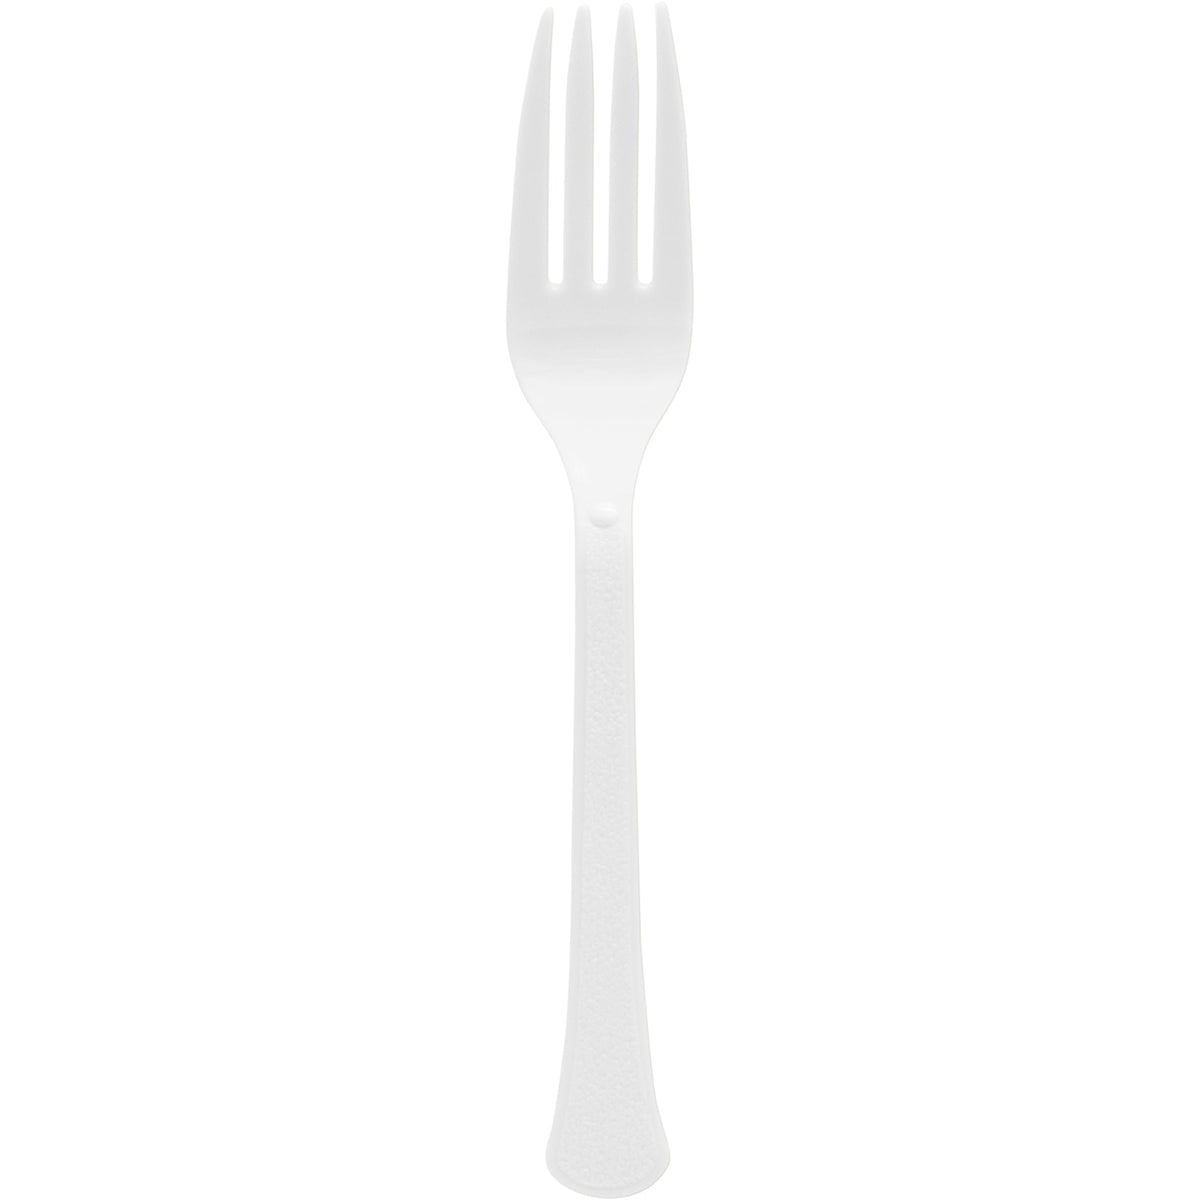 AMSCAN CA Disposable-Plasticware Frosty White Plastic Forks, 20 Count 192937434369